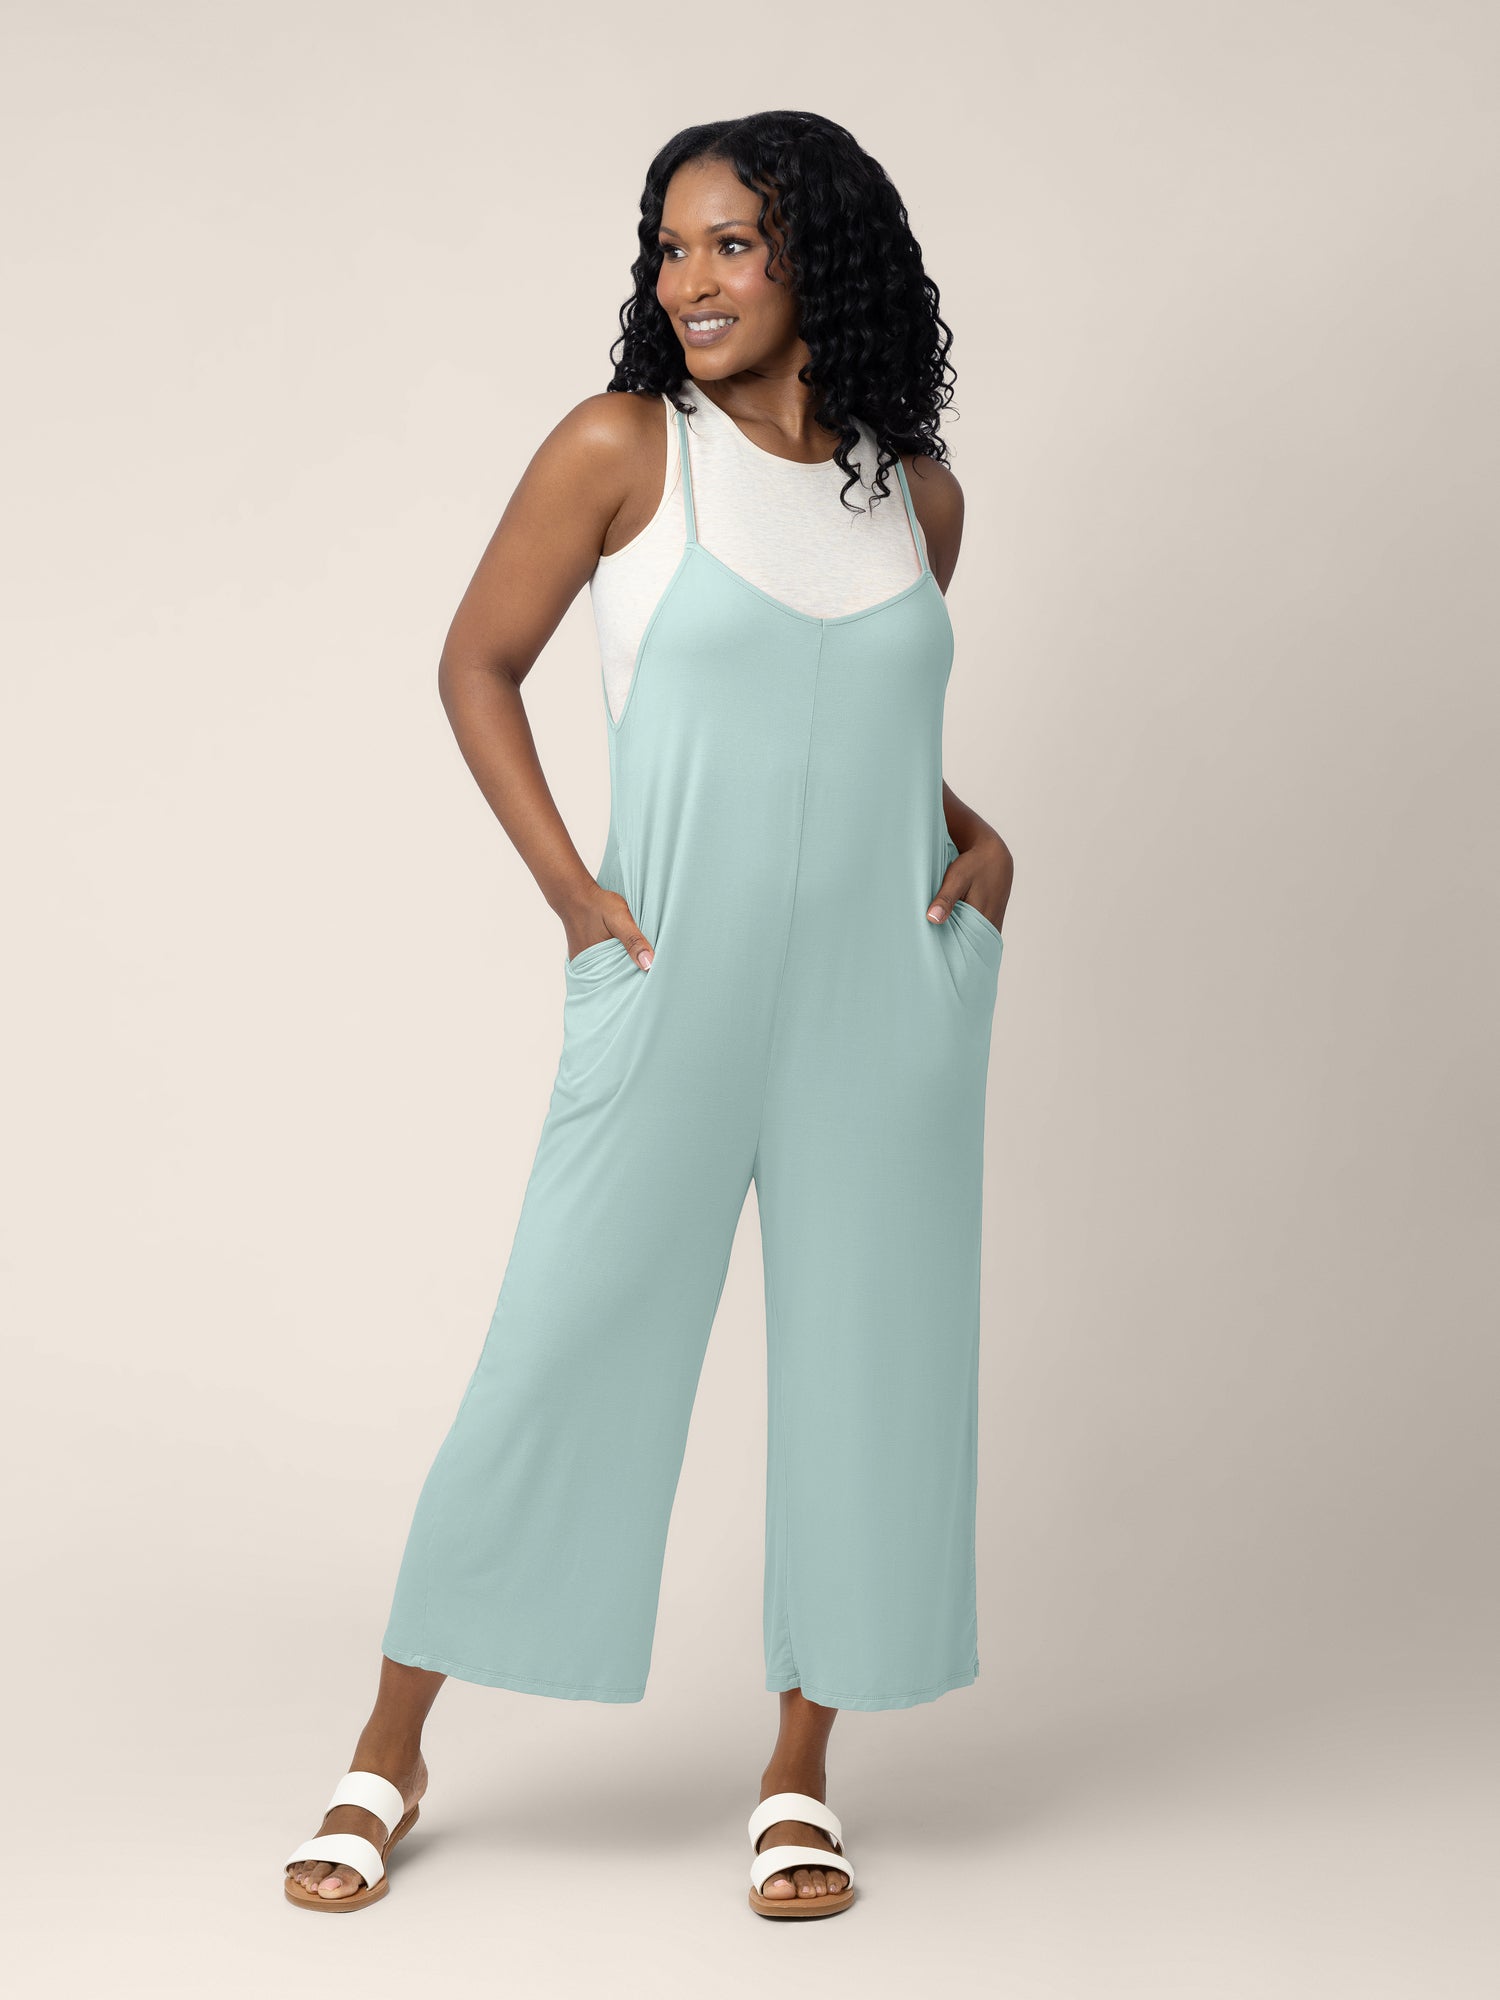 A model wearing the Charlie Maternity & Nursing Romper in Dusty Blue Green @model_info:Rashé is 5'6" and wearing a Small.